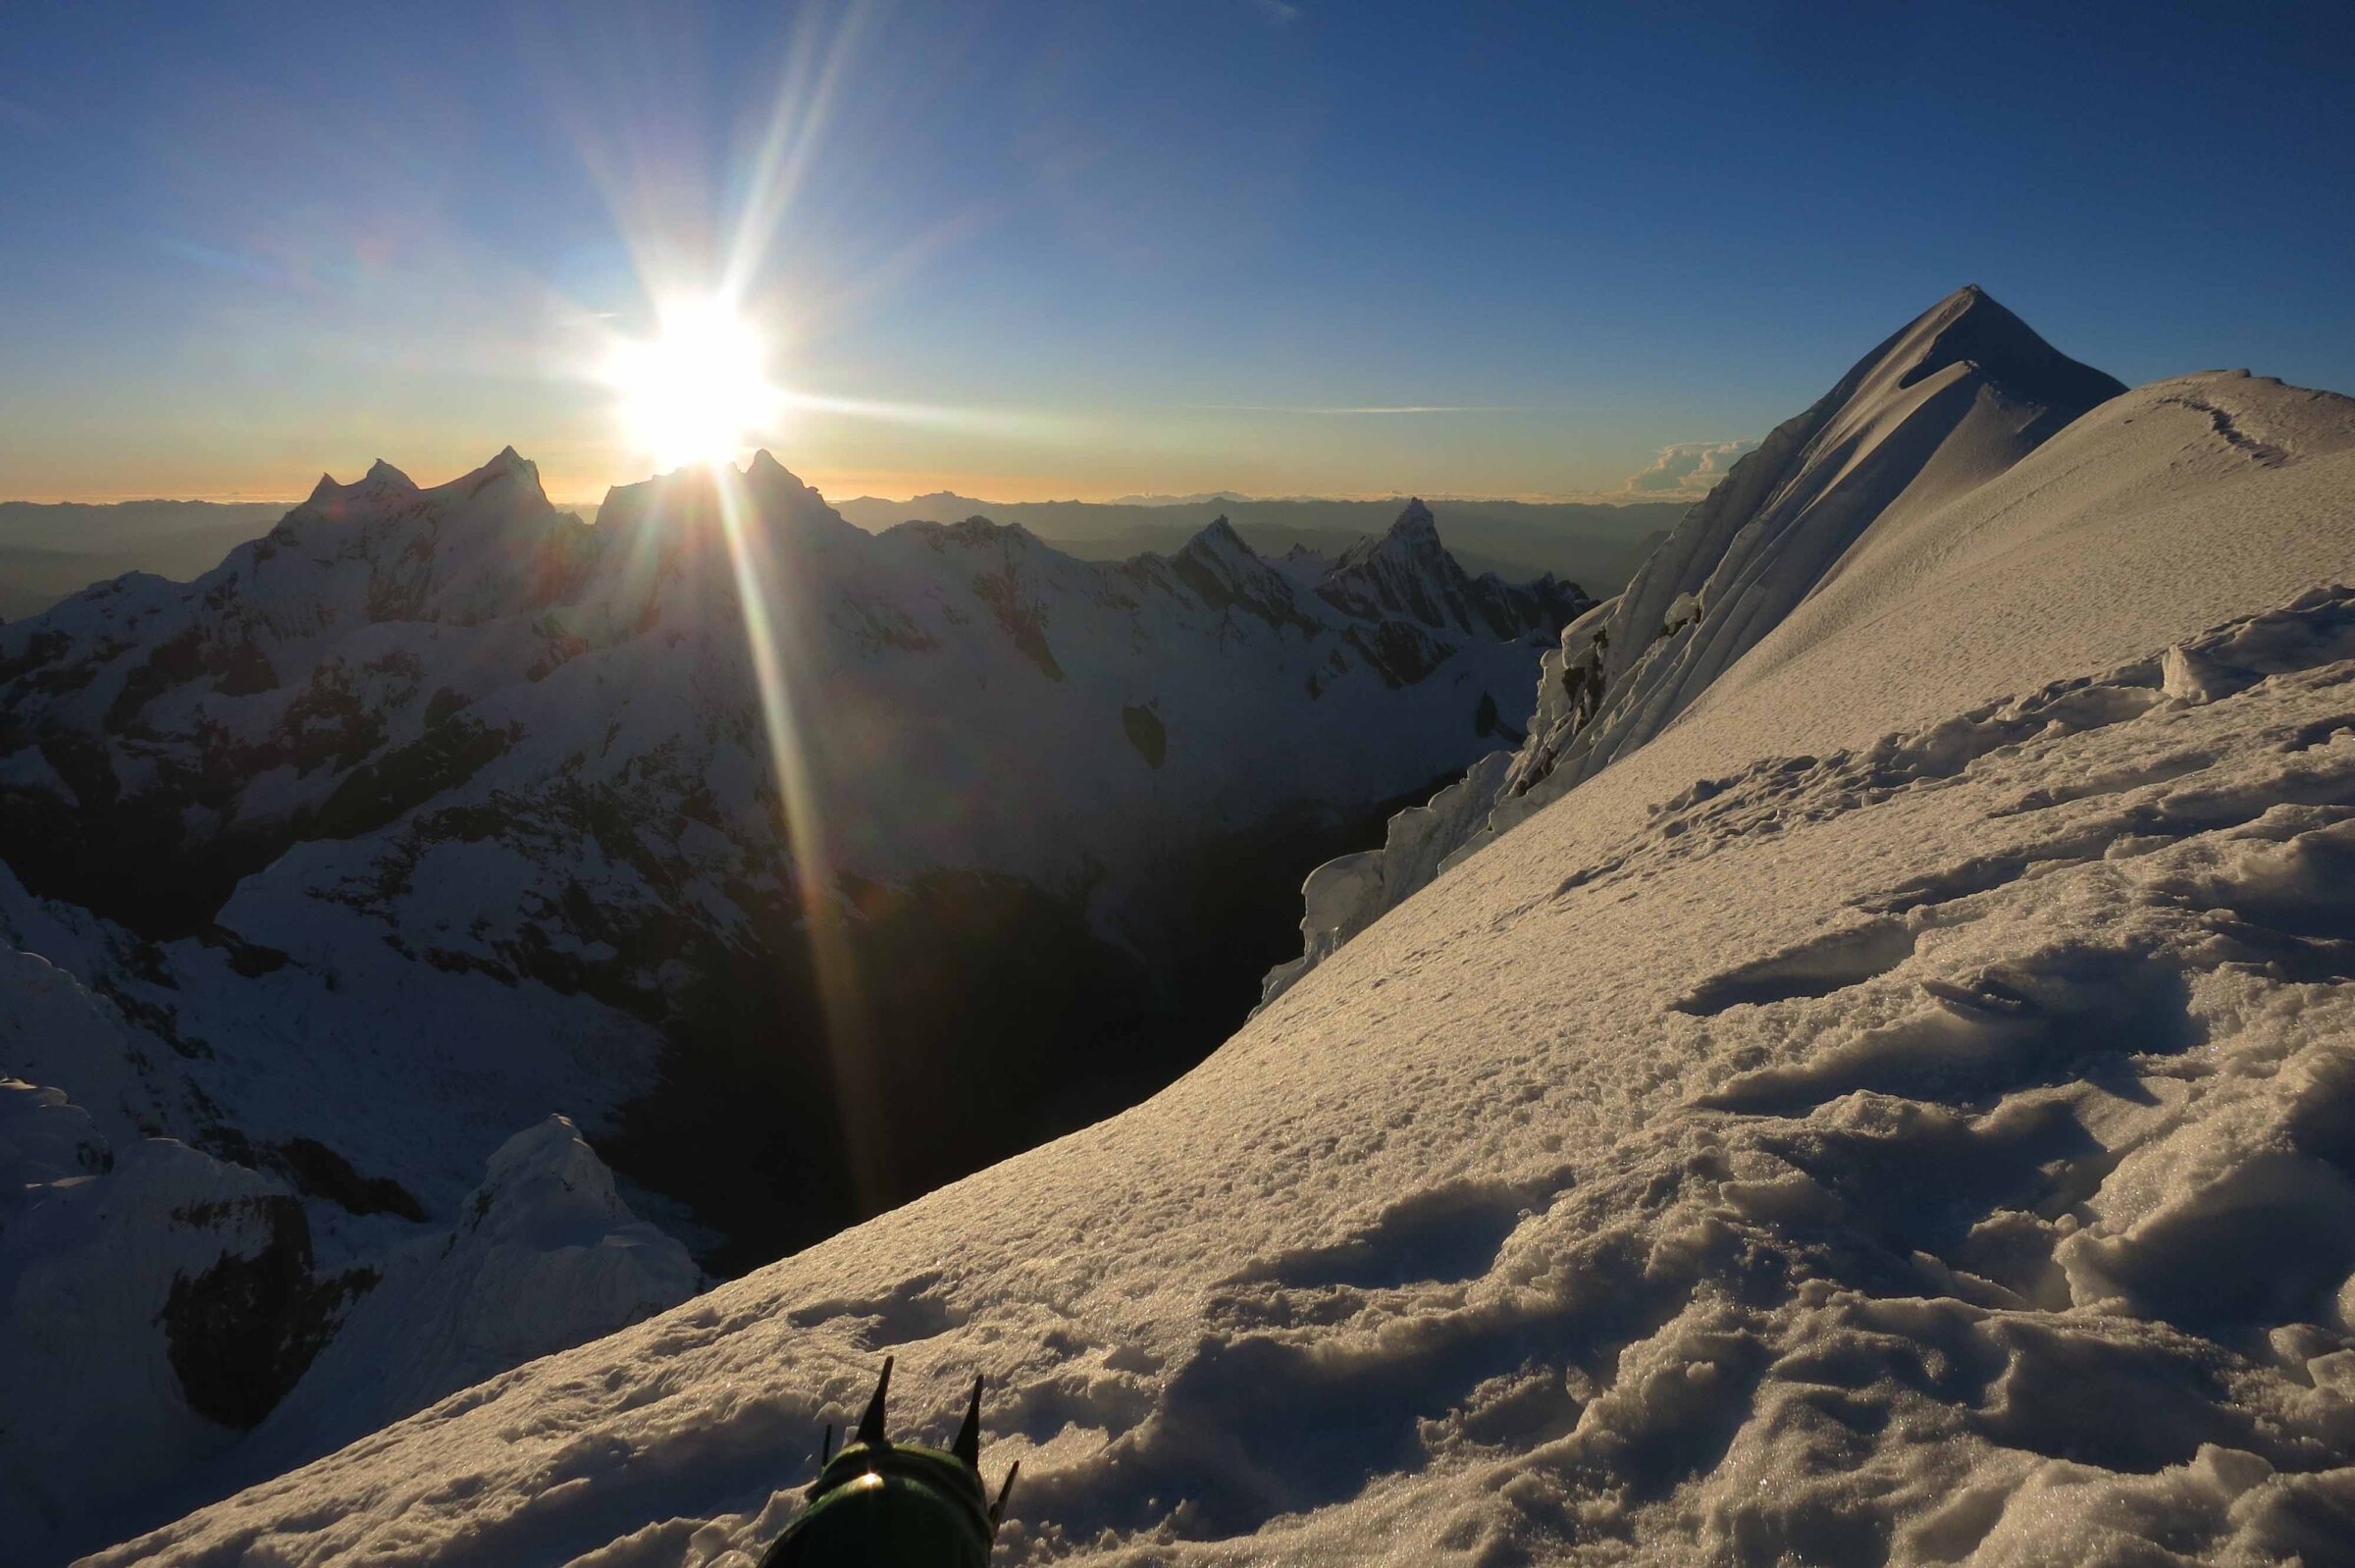 The sun rising over the Cordillera Blanca during a Pisco and Chopicalqui Expedition